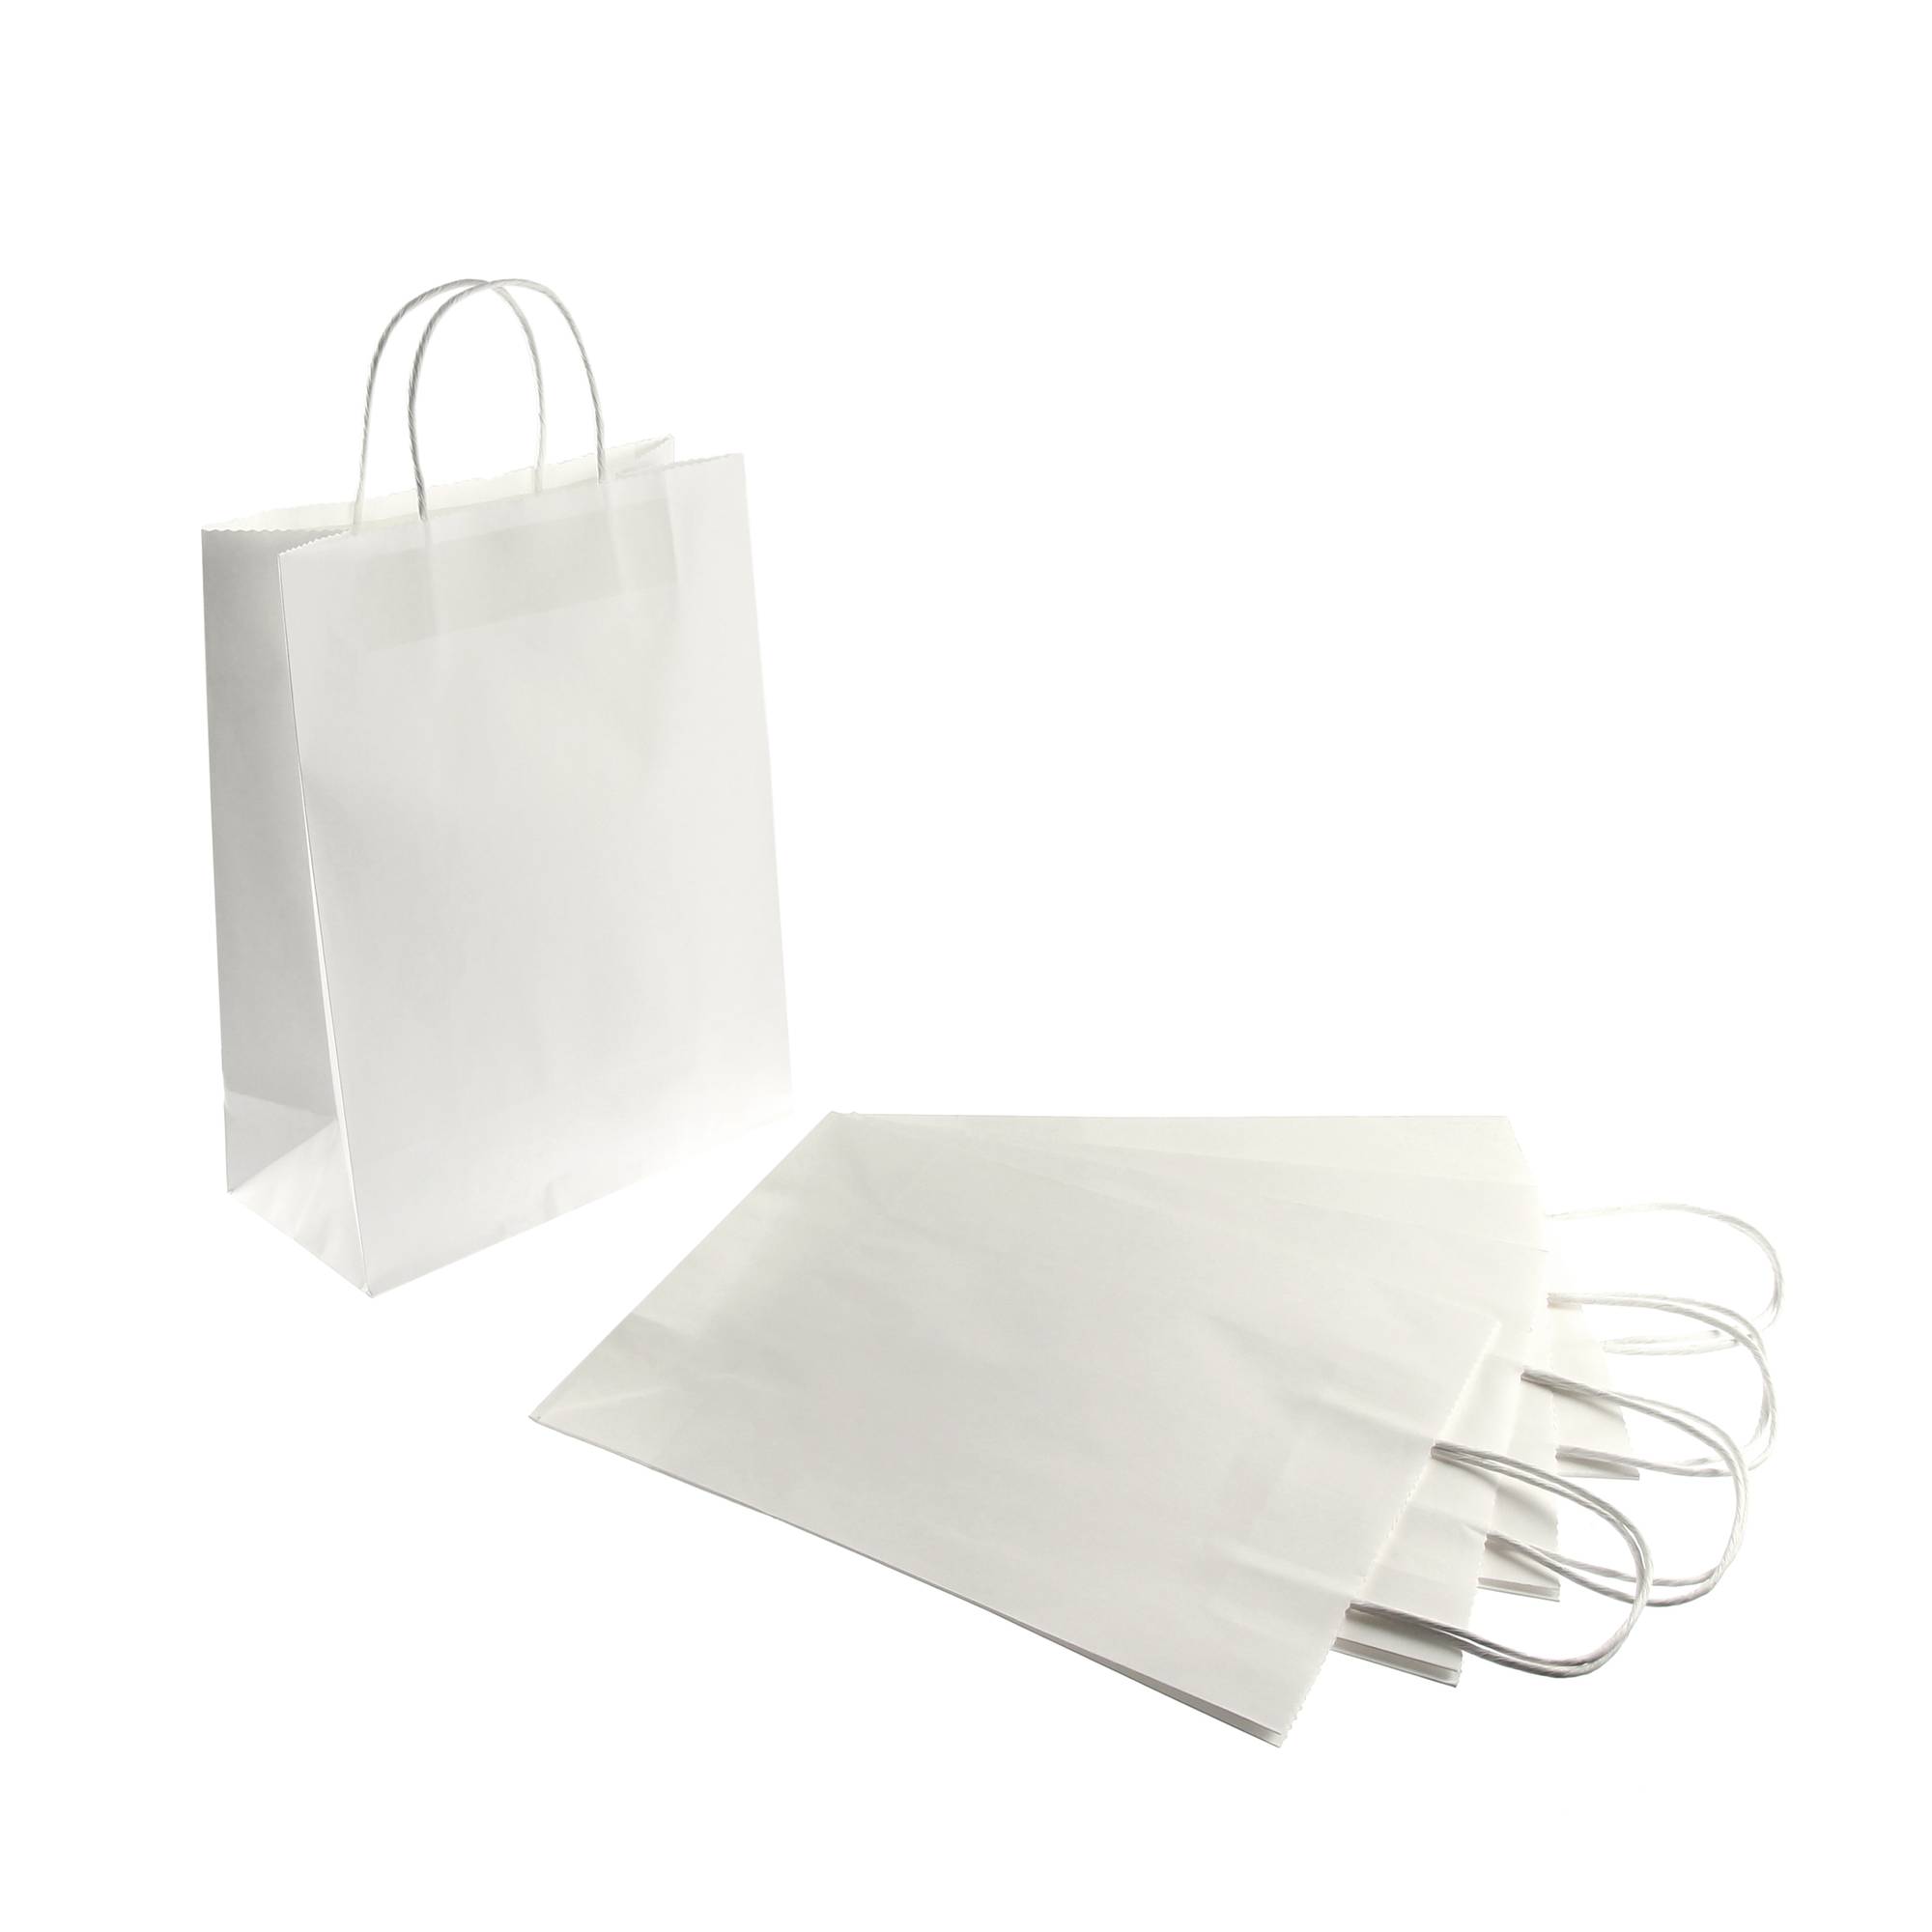 Large White Paper Shopping Bags (100 pcs.) | A&B Store Fixtures